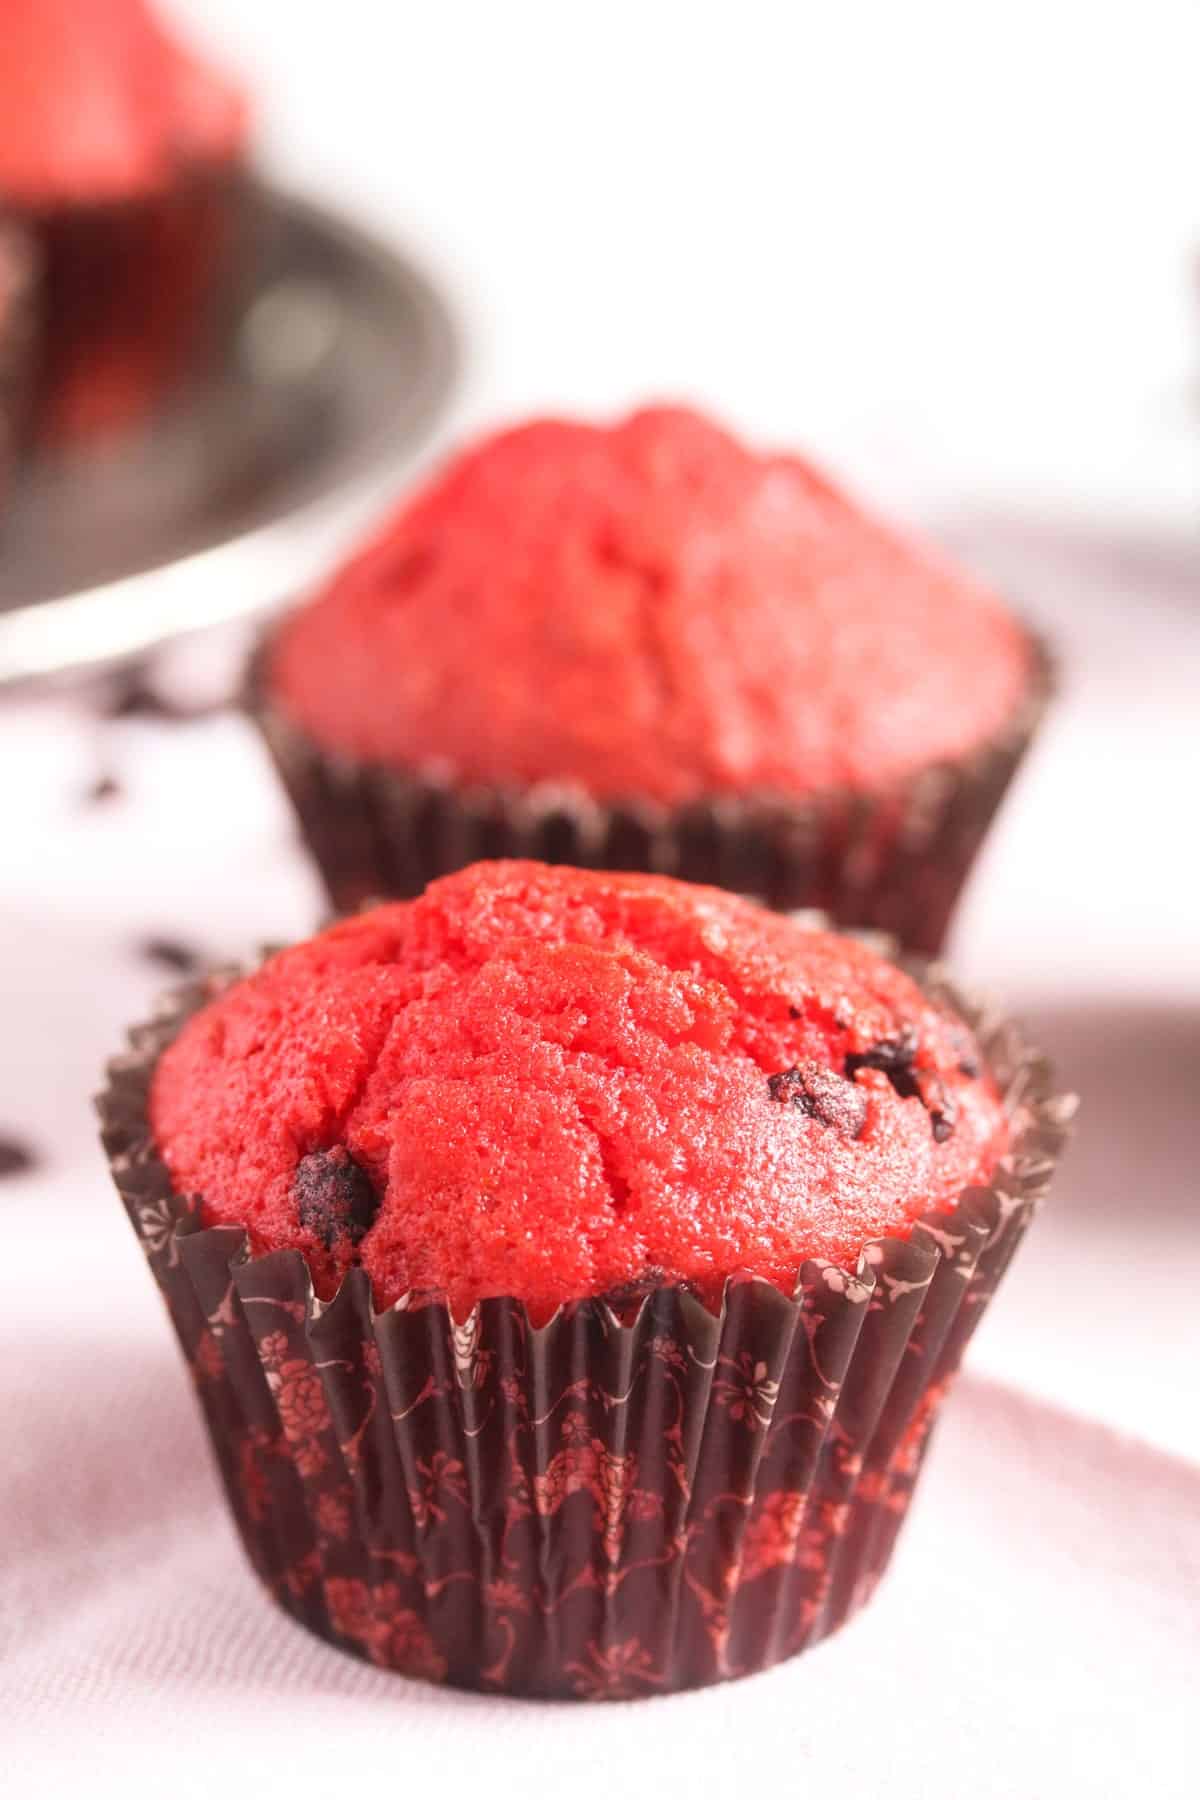 two red colored muffins with chocolate chips.